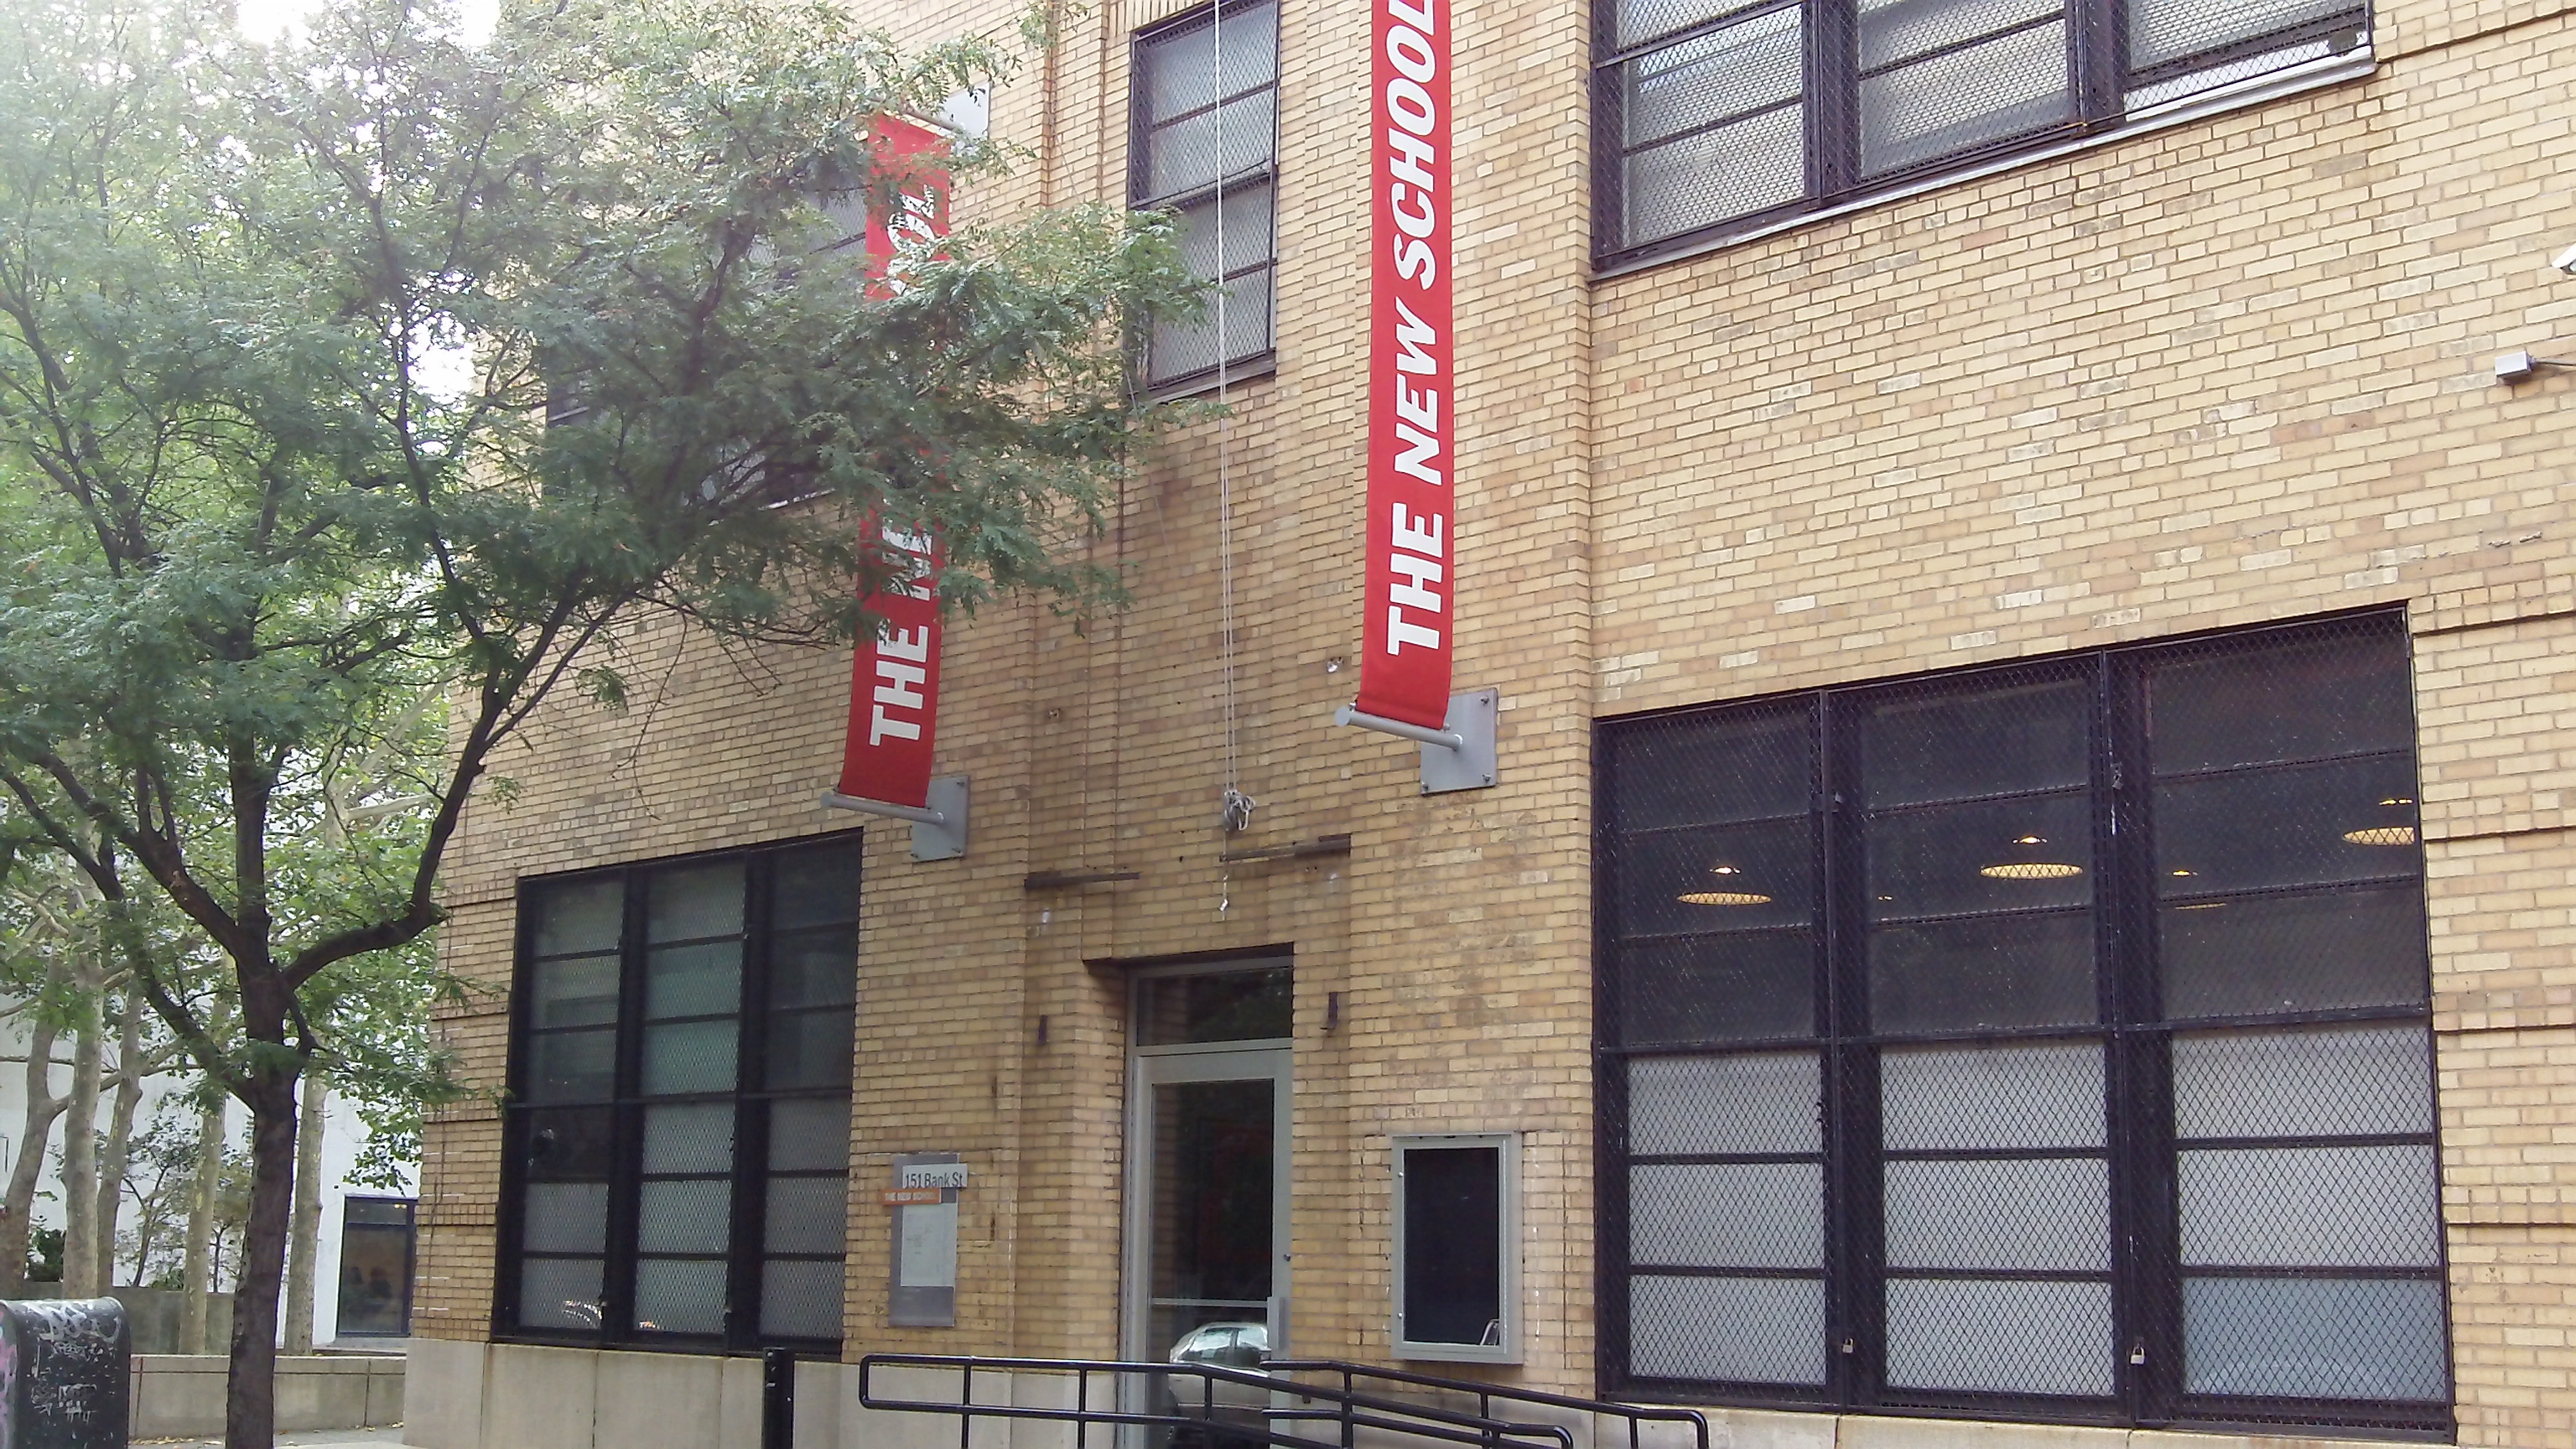 entrance to the New School for Drama